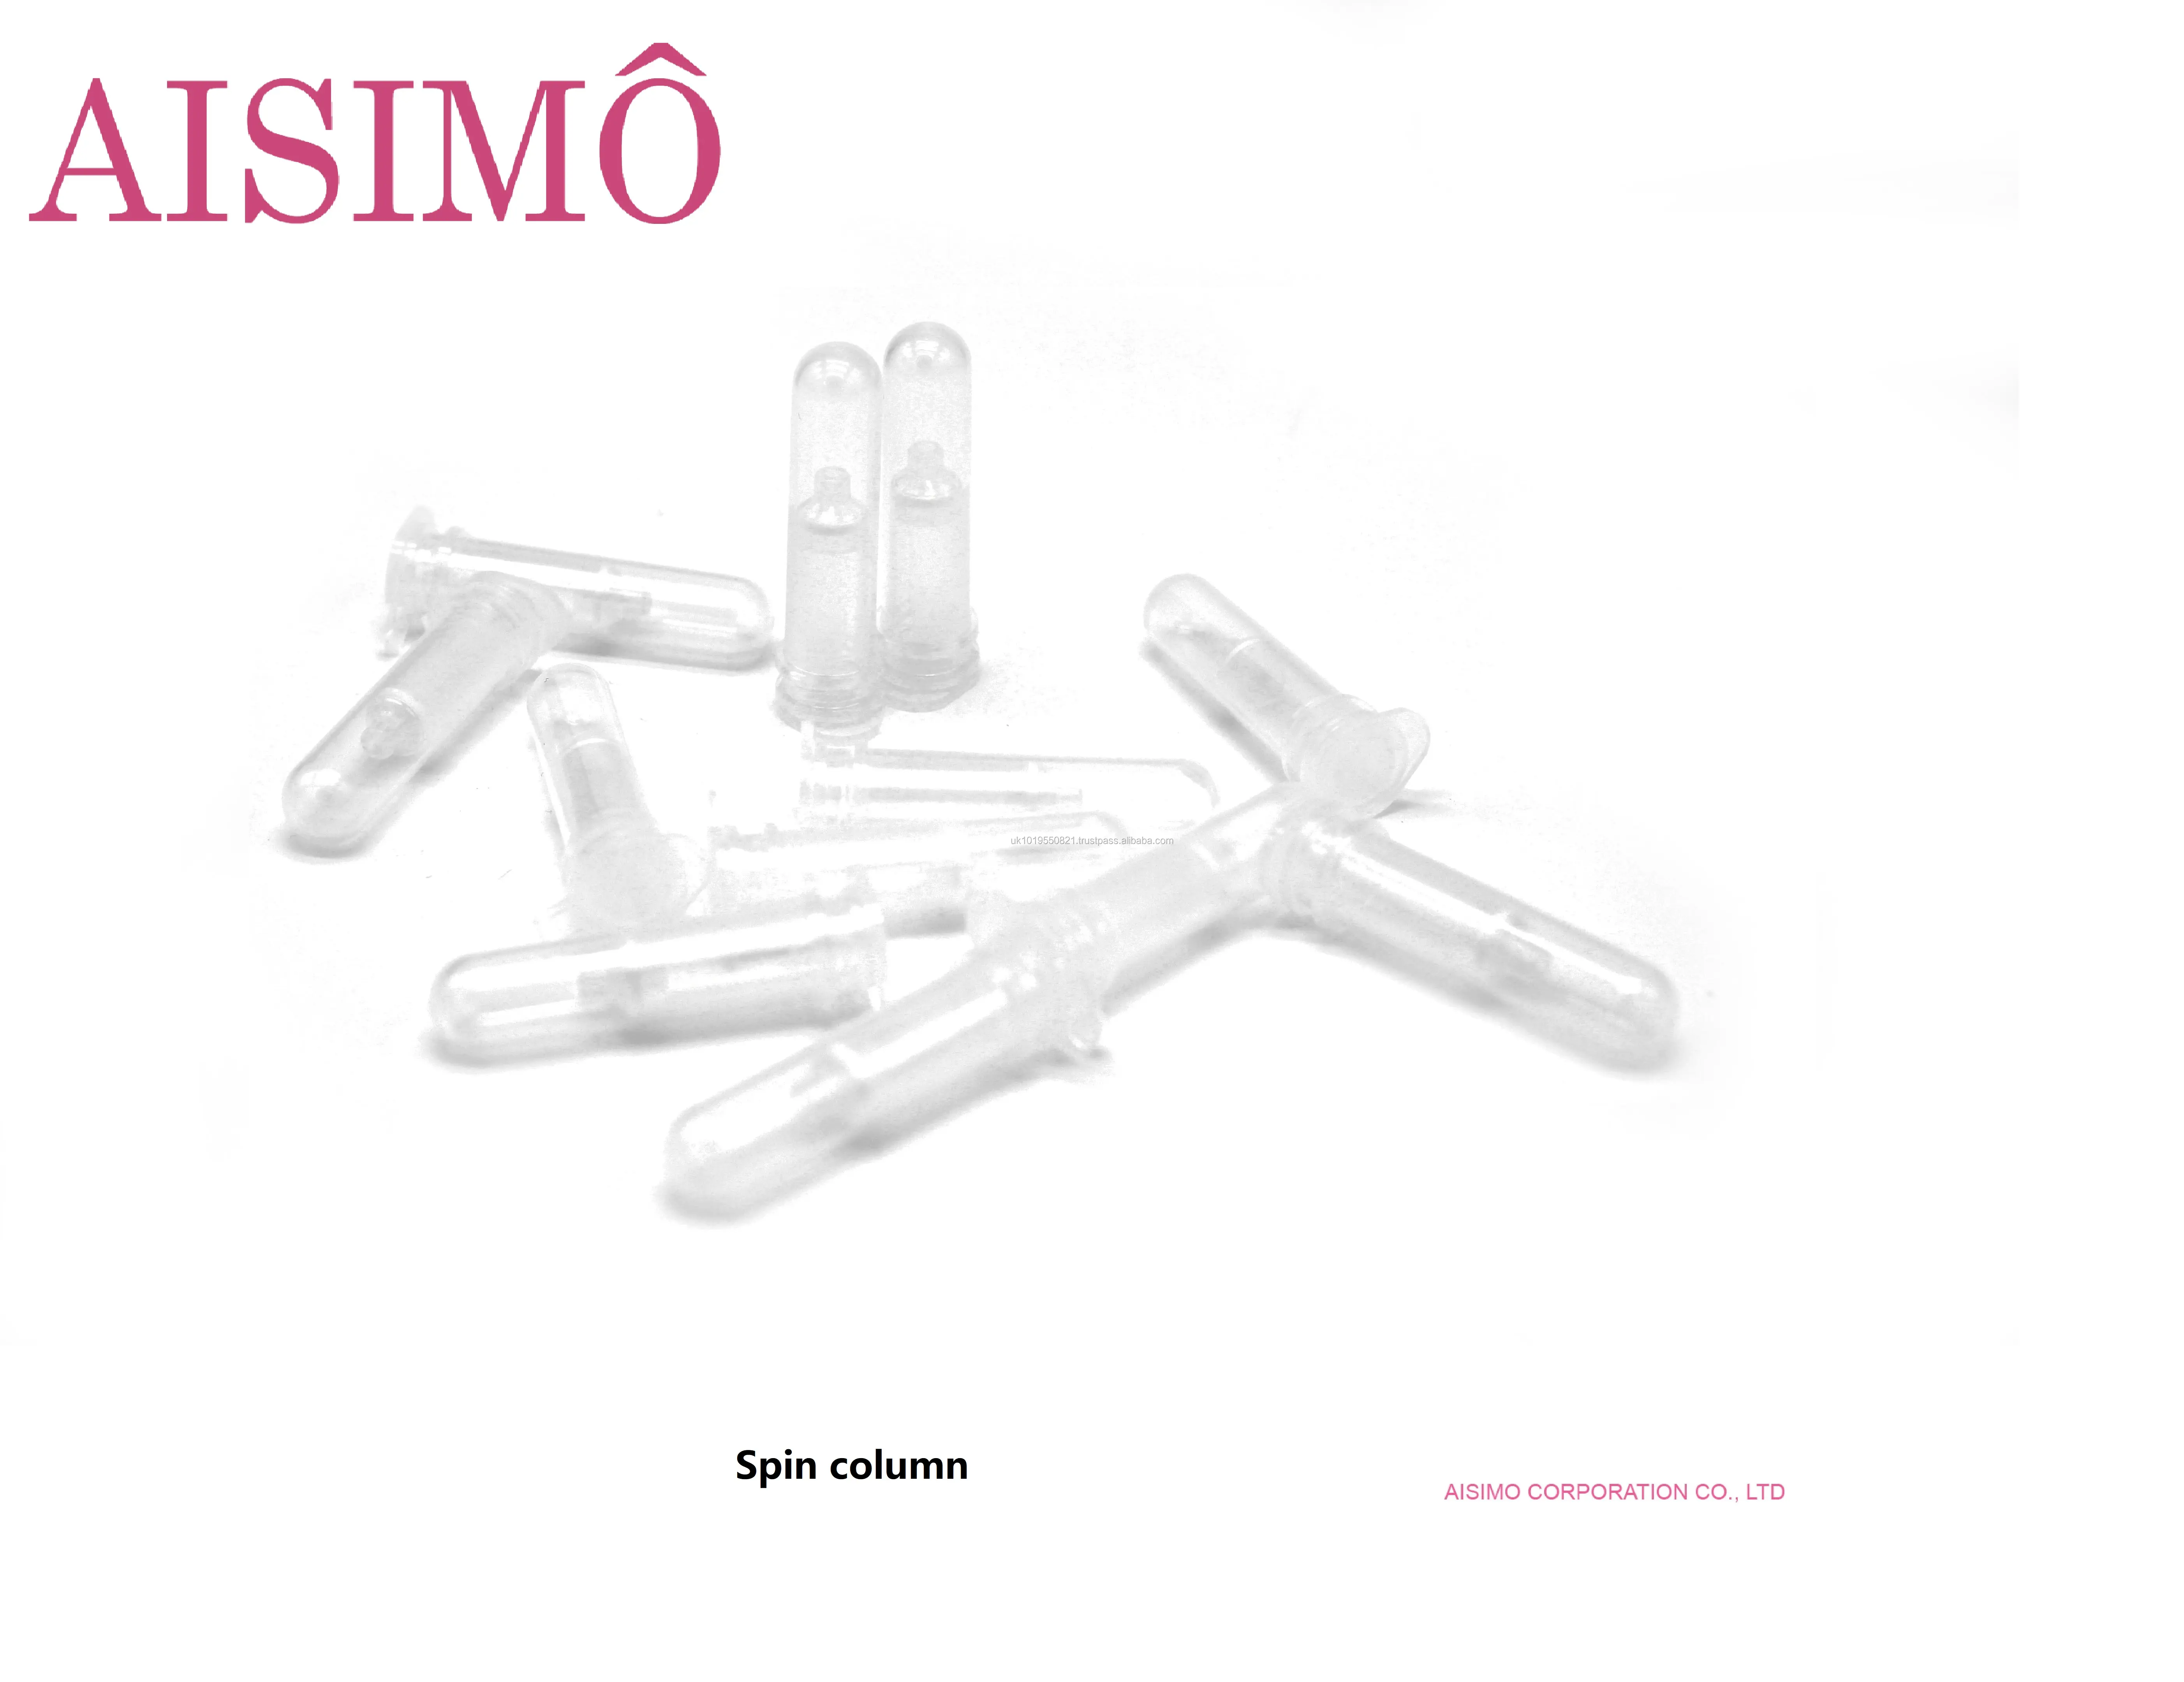 AISIMO special Diagnostic chromatography membrane in Spin column for Plant RNA Isolation max to 60-100ug